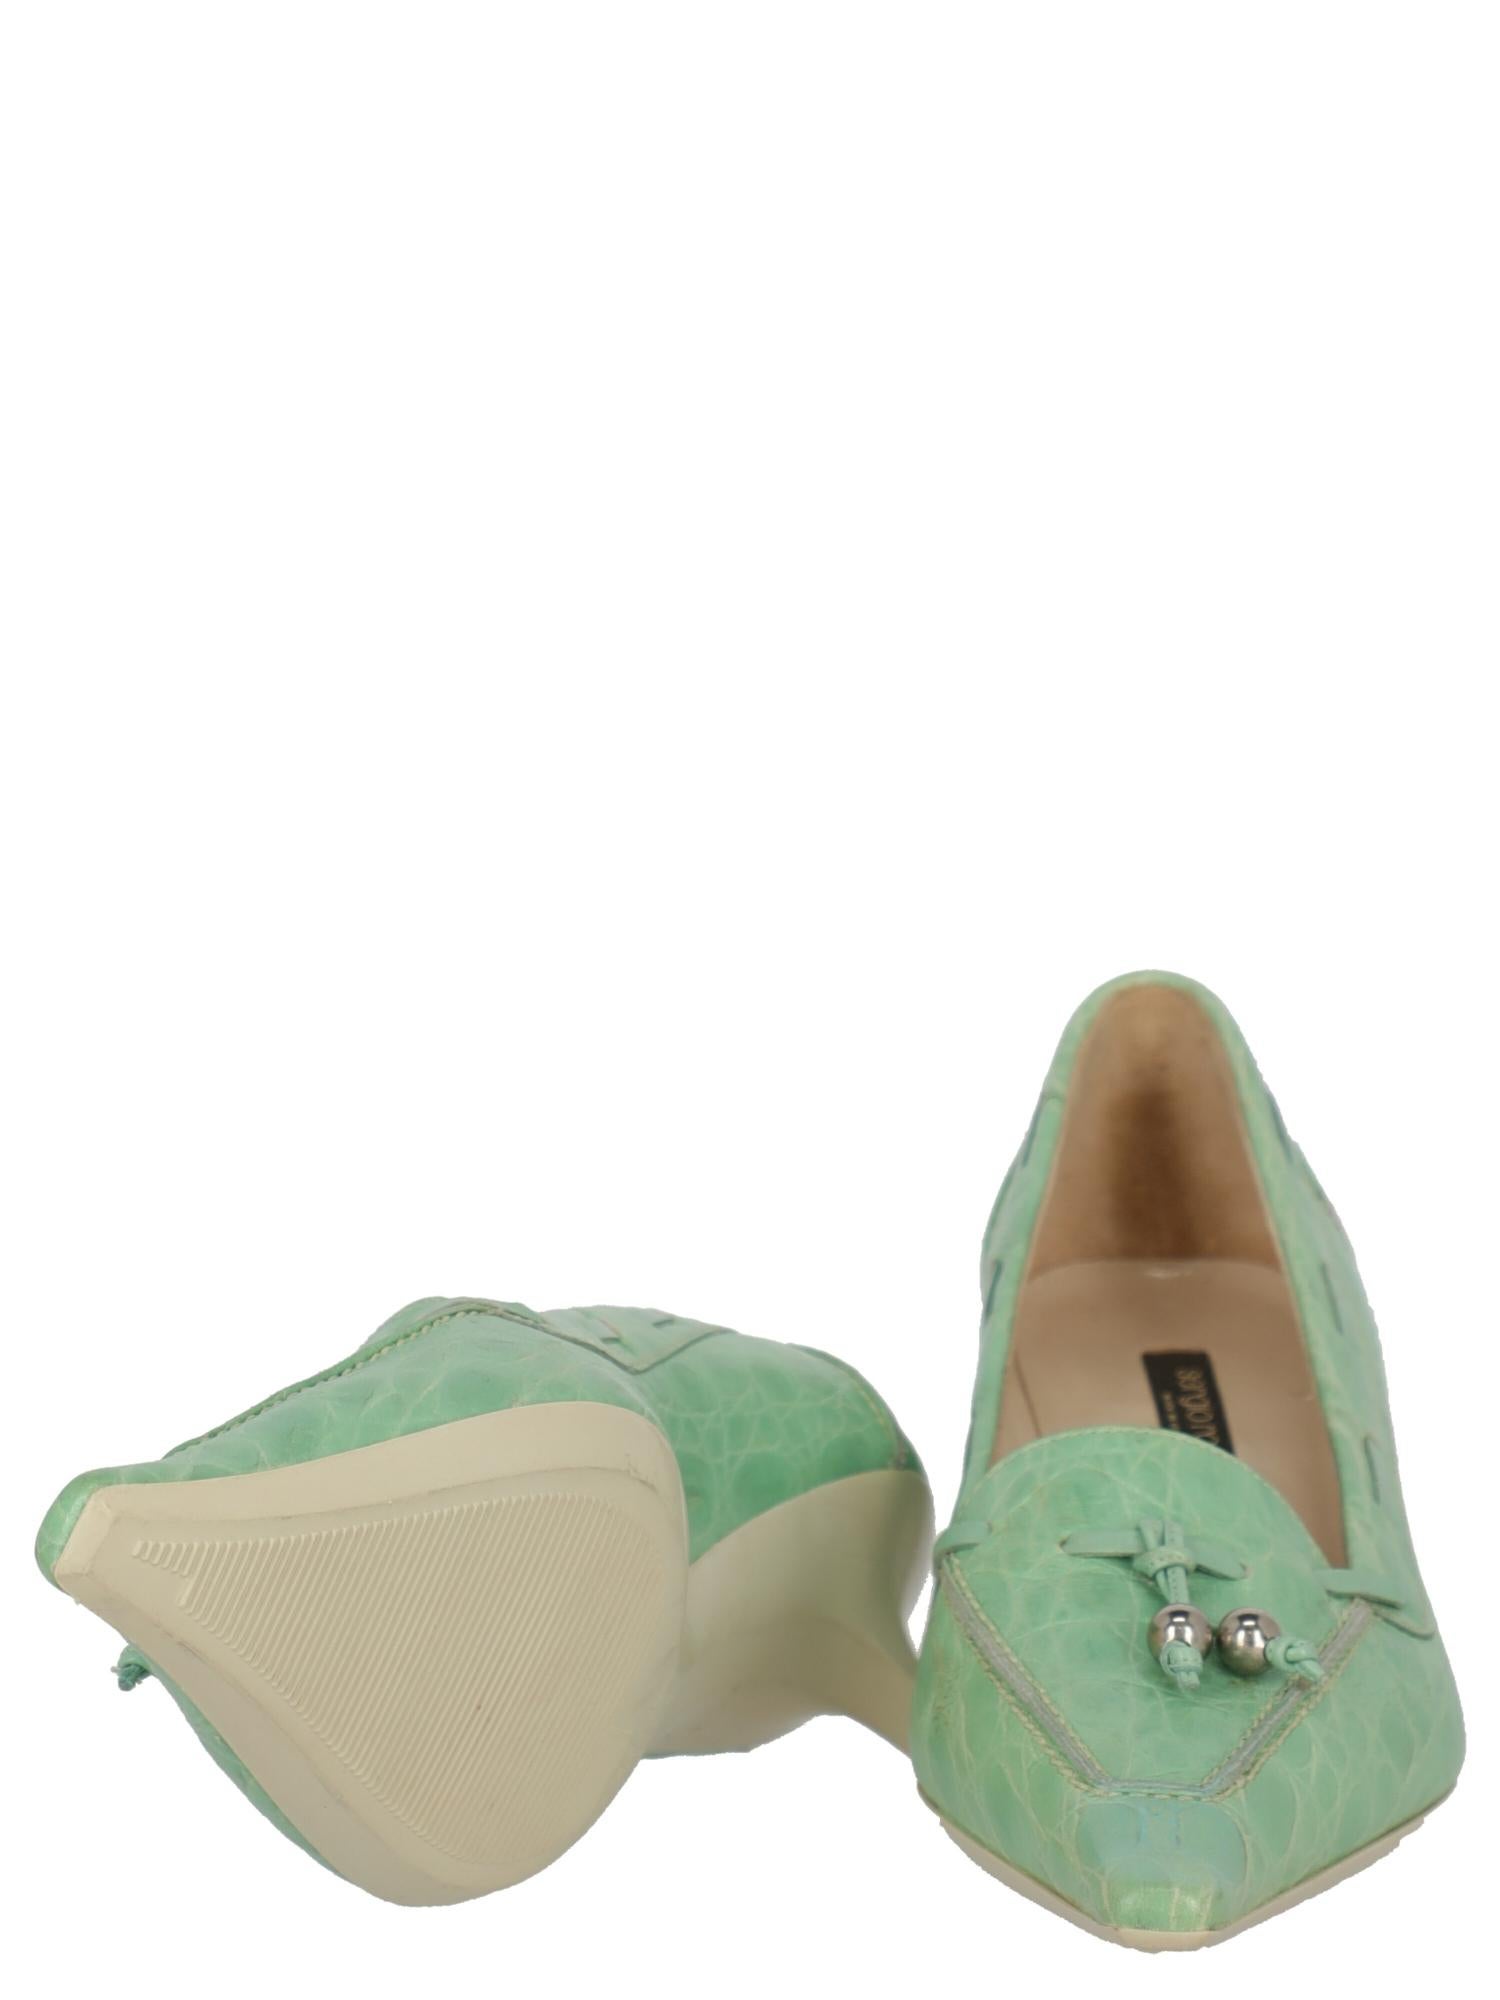 Sergio Rossi  Women   Pumps  Green Leather EU 37.5 In Good Condition For Sale In Milan, IT